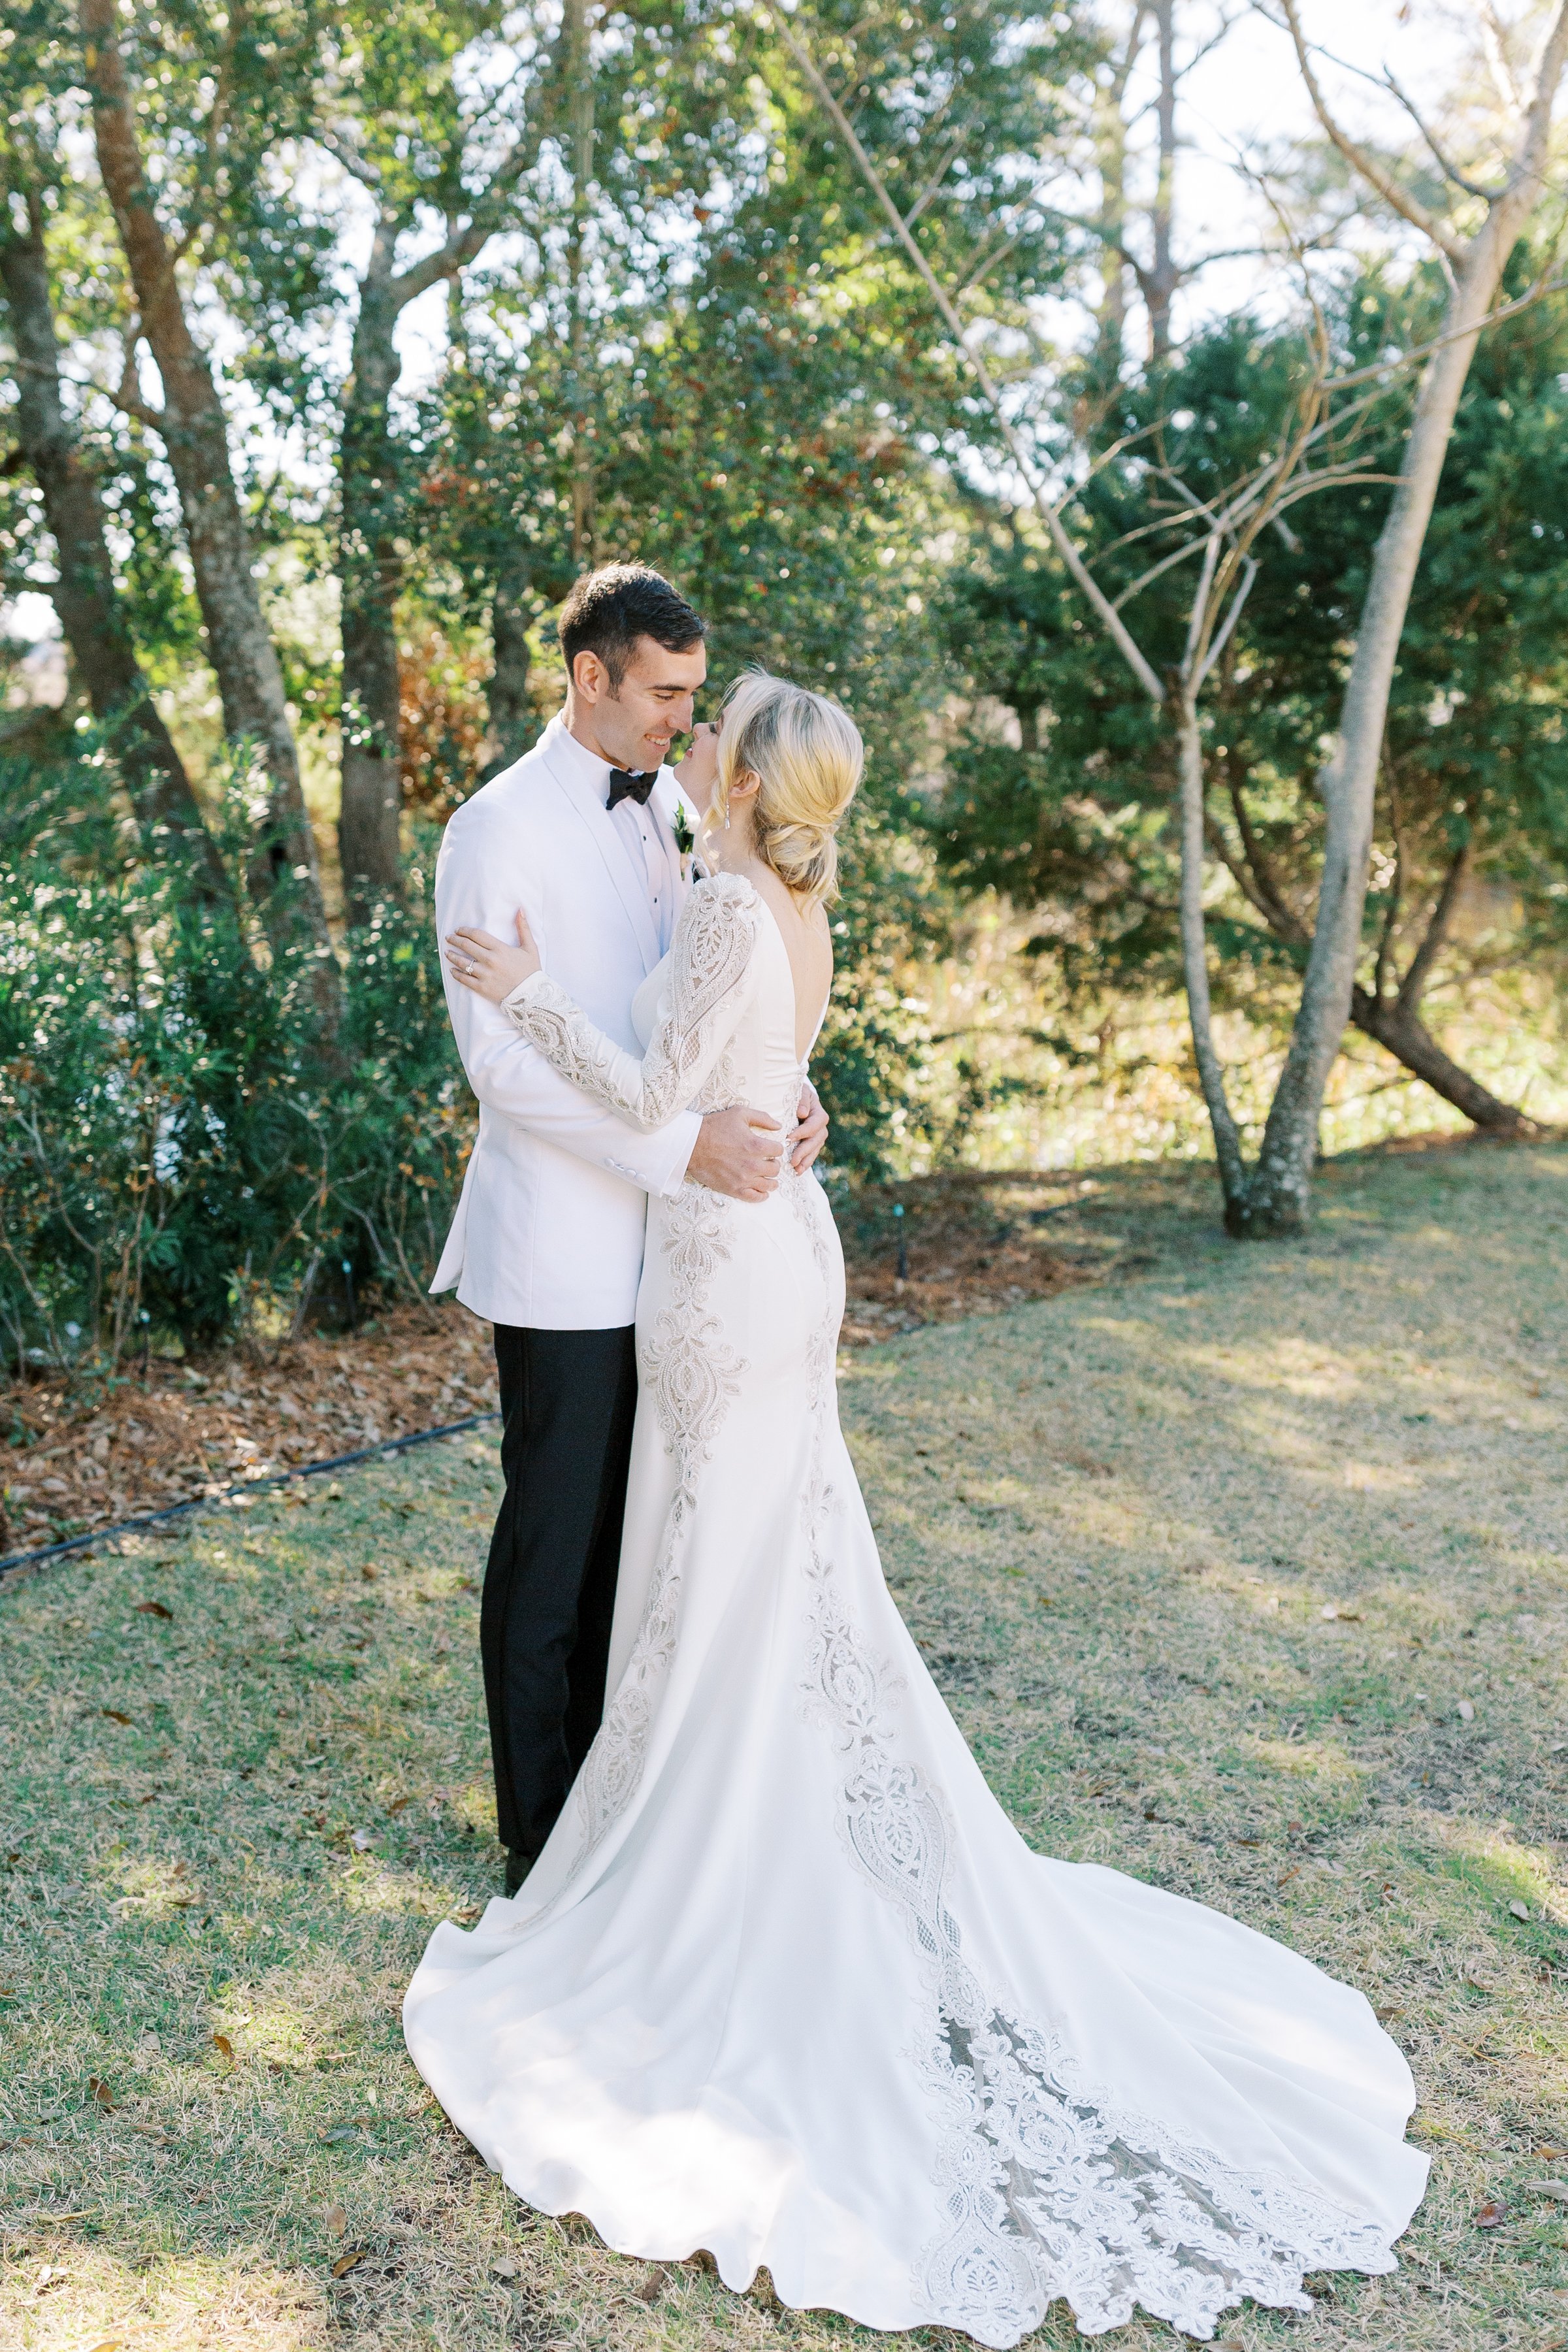 cheyenne-and-nicks-wedding-at-the-tybee-island-wedding-chapel-planned-by-savannah-wedding-planner-ivory-and-beau-with-sottero-and-midgley-gown-from-savannah-bridal-shop-and-wedding-florals-from-savannah-florist-6.jpg